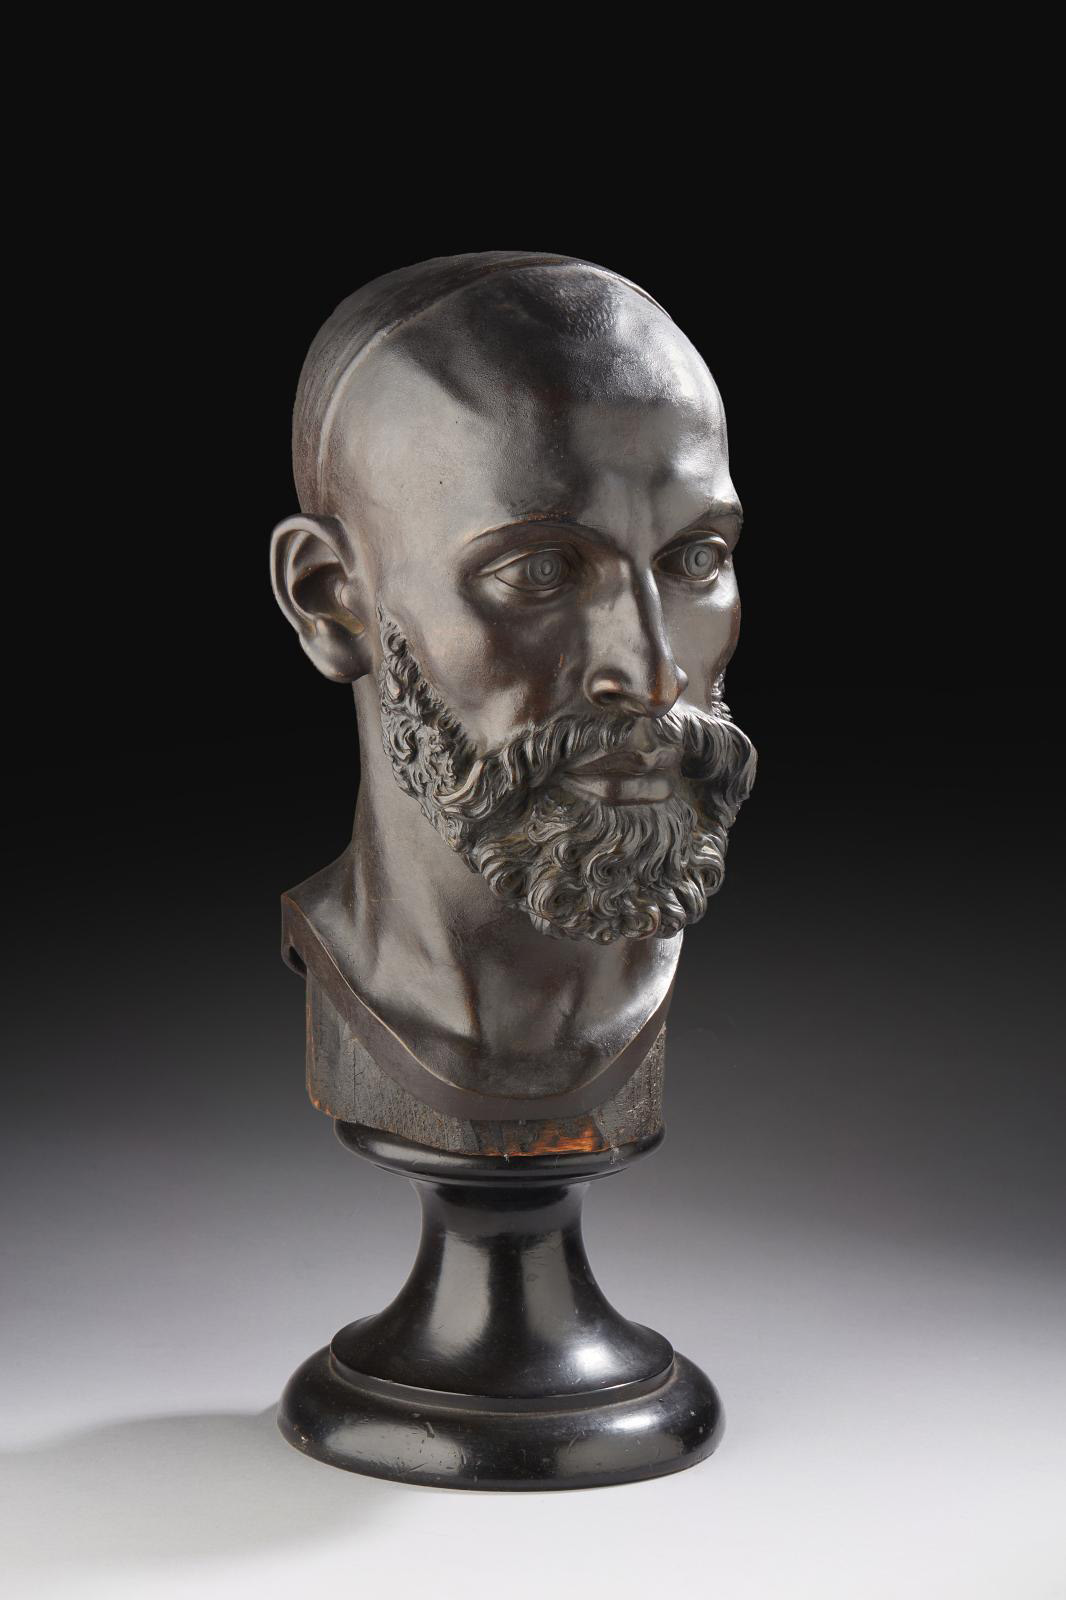 Charles Henri Joseph Cordier (1827-1905), Arab of El Aghouat and Arab Sheikh of Cairo, master models in bronze with a brown patina, c. 1856 and 1866, height 48 and 47 cm (18.9 and 18.51 in), pedestal: 14 cm (5.52 in). Estimate: €20,000/€30,000